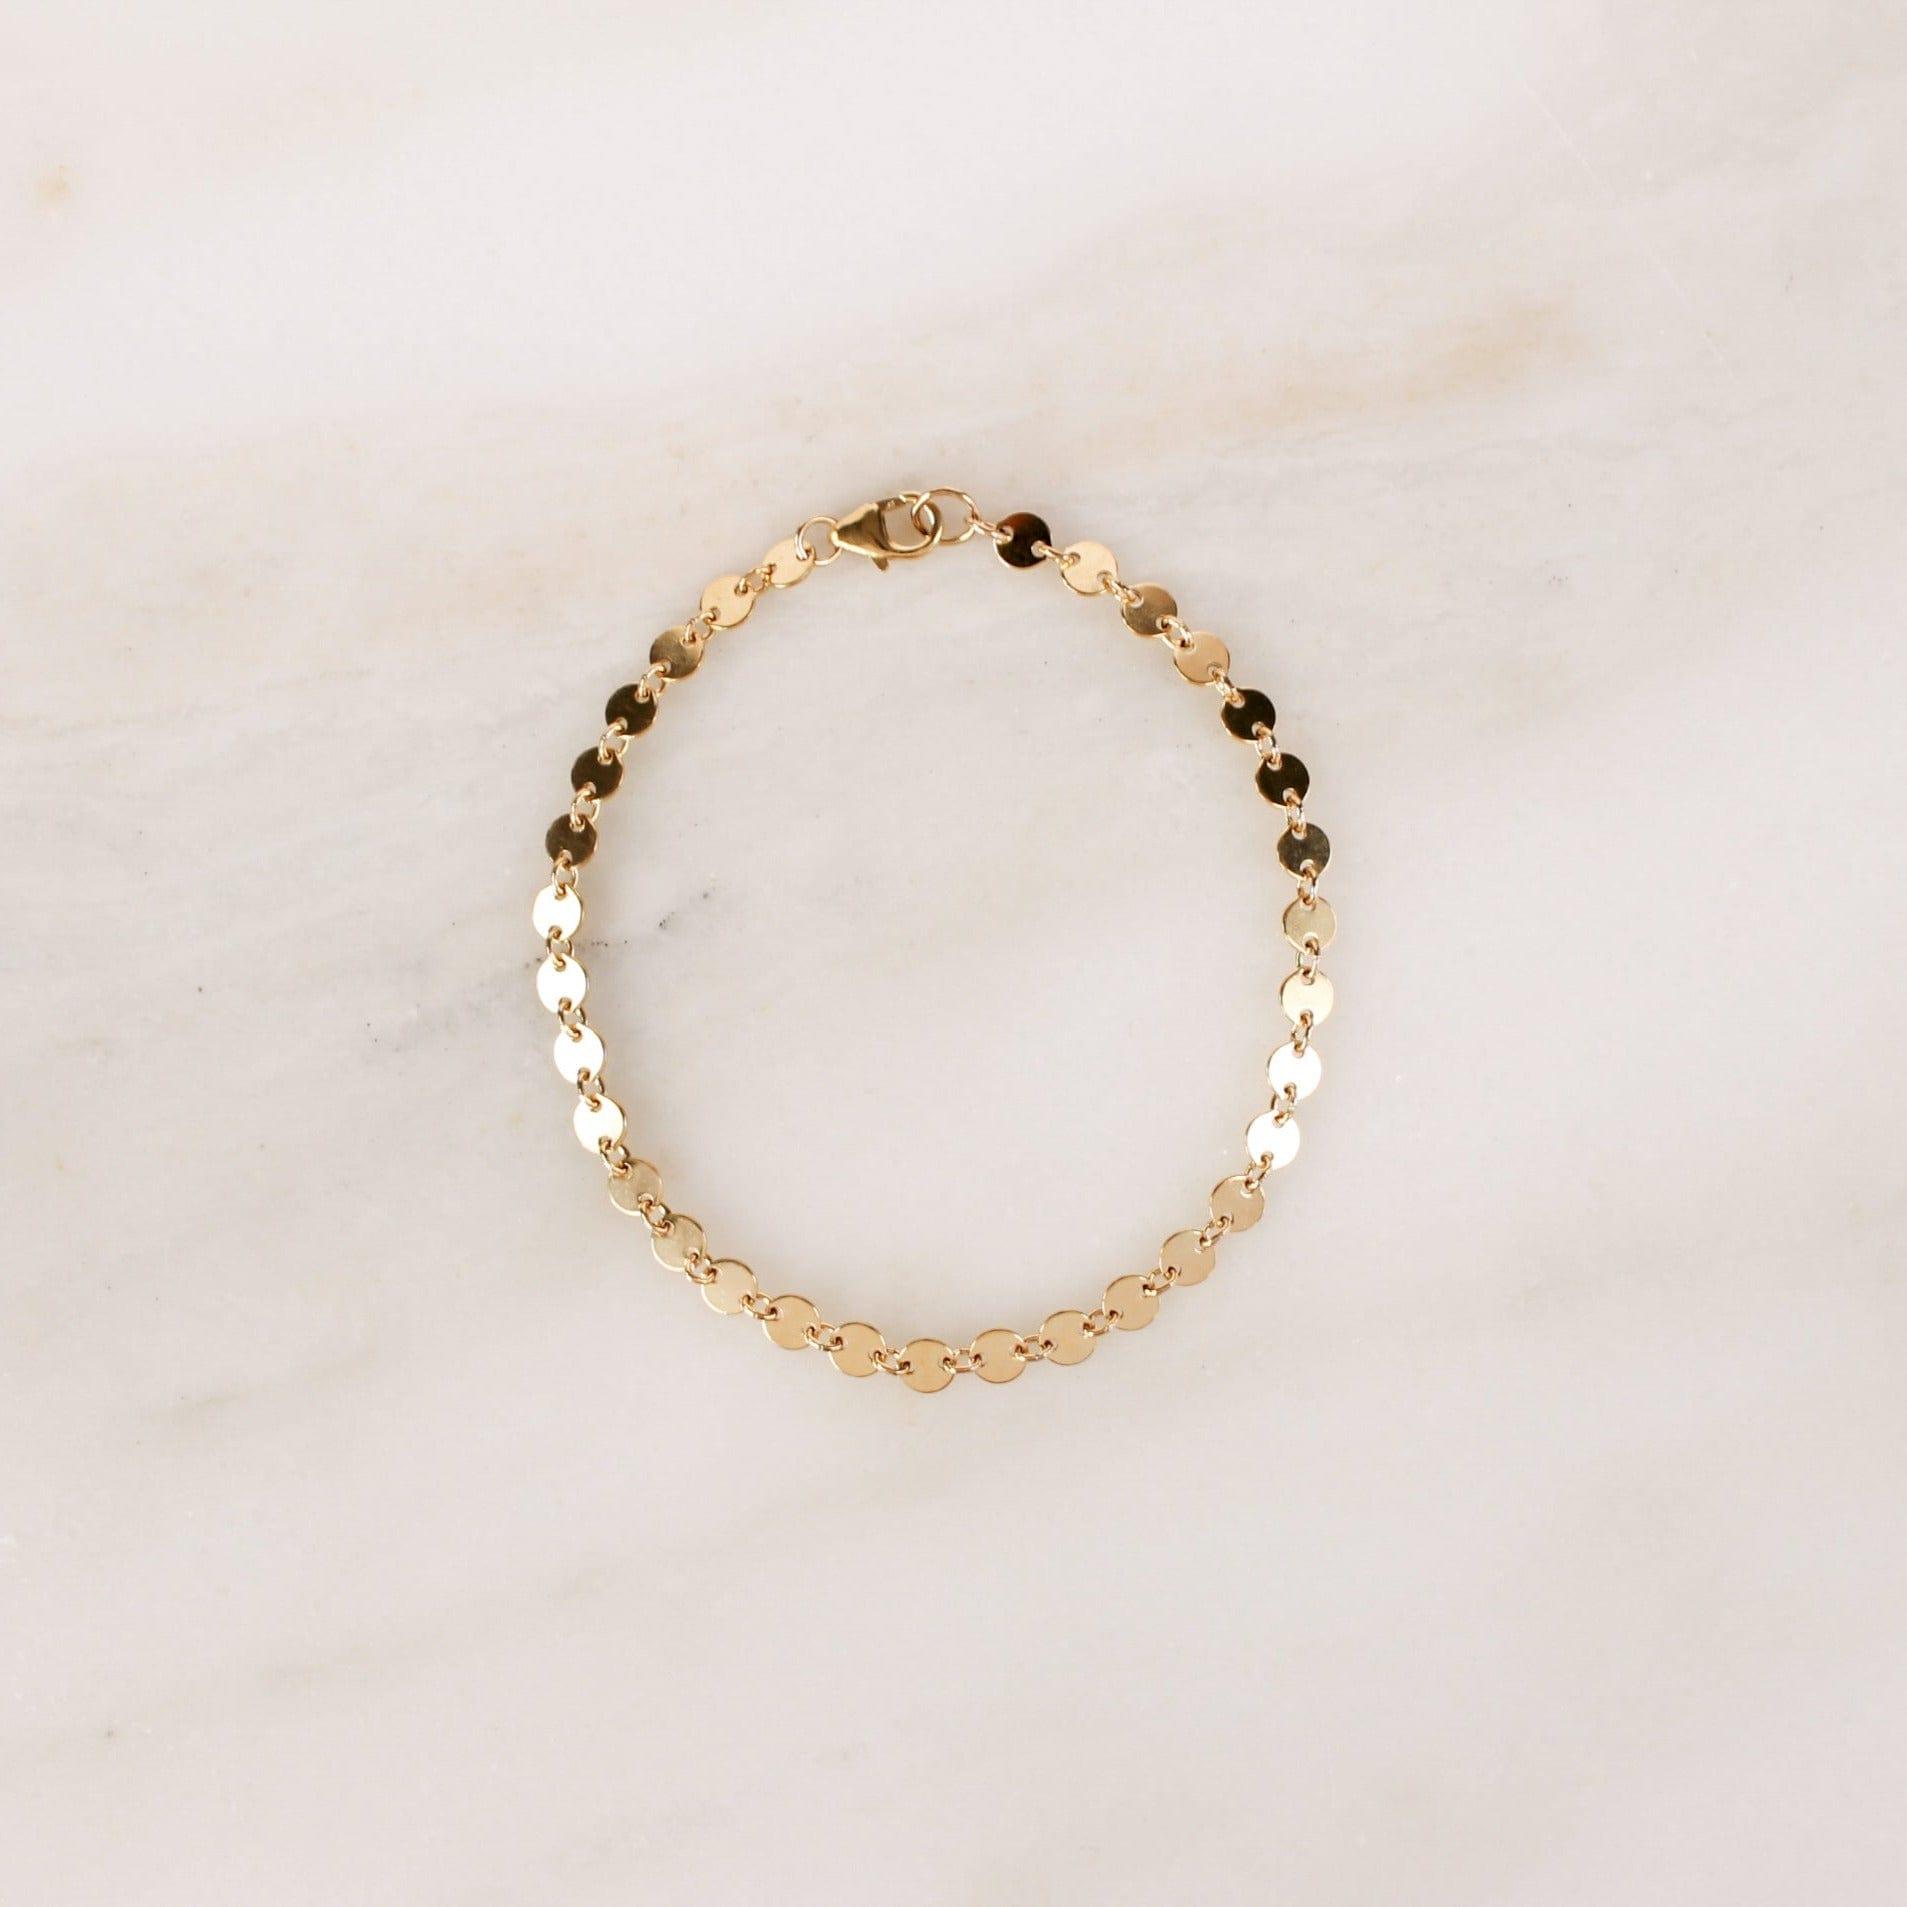 Sequin Chain Bracelet - Nolia Jewelry - Meaningful + Sustainably Handcrafted Jewelry